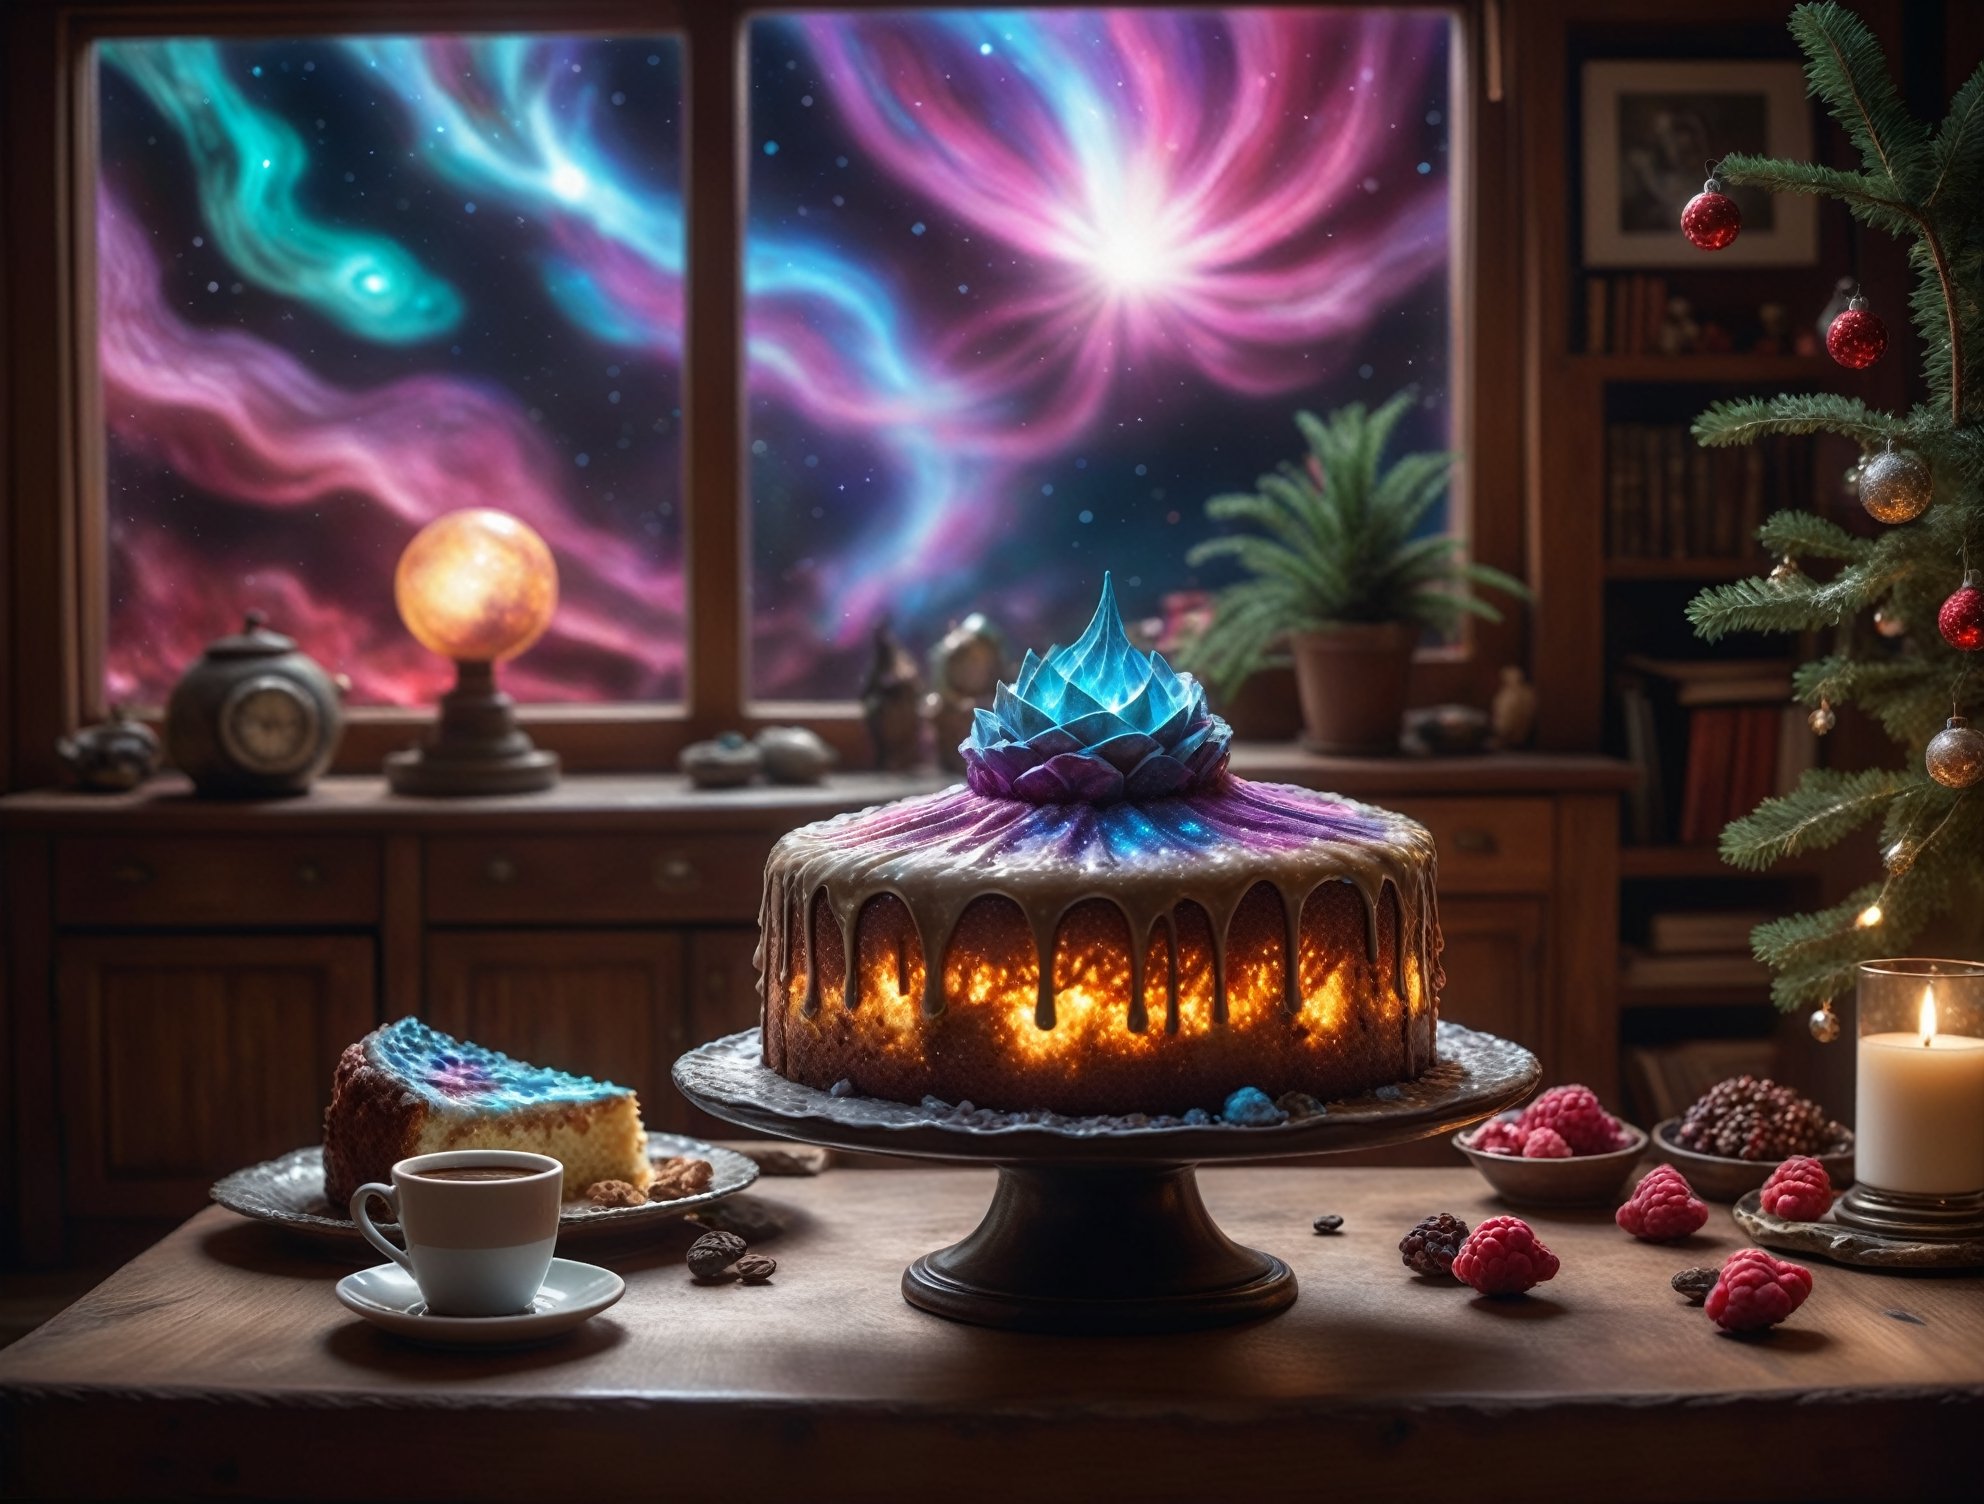 (foodtography, a delicious glowing cake, a glowing radiant cosmic plasma aurora galaxy cake with arcane icing:1.3), cinematic still shot, antique coffee table in a cozy mystical living room, internal gel lighting inside cake, fully frosted mystical berry cake, christmas theme, christmas tree, warm fireplace, cozy atmosphere, radiant cosmic plasma aurora nebula galaxy swirling around outside the arched windows, spacepunk living room, aw0k magnstyle, dramatic lighting, 3 point lighting, flash with softbox, cinematic colors, Leica SL-2 120mm f/2.8, realism, photo, hyperrealistic, film grain, Neutral-Density-Filter, deep Focus, cinema quality, RAW image